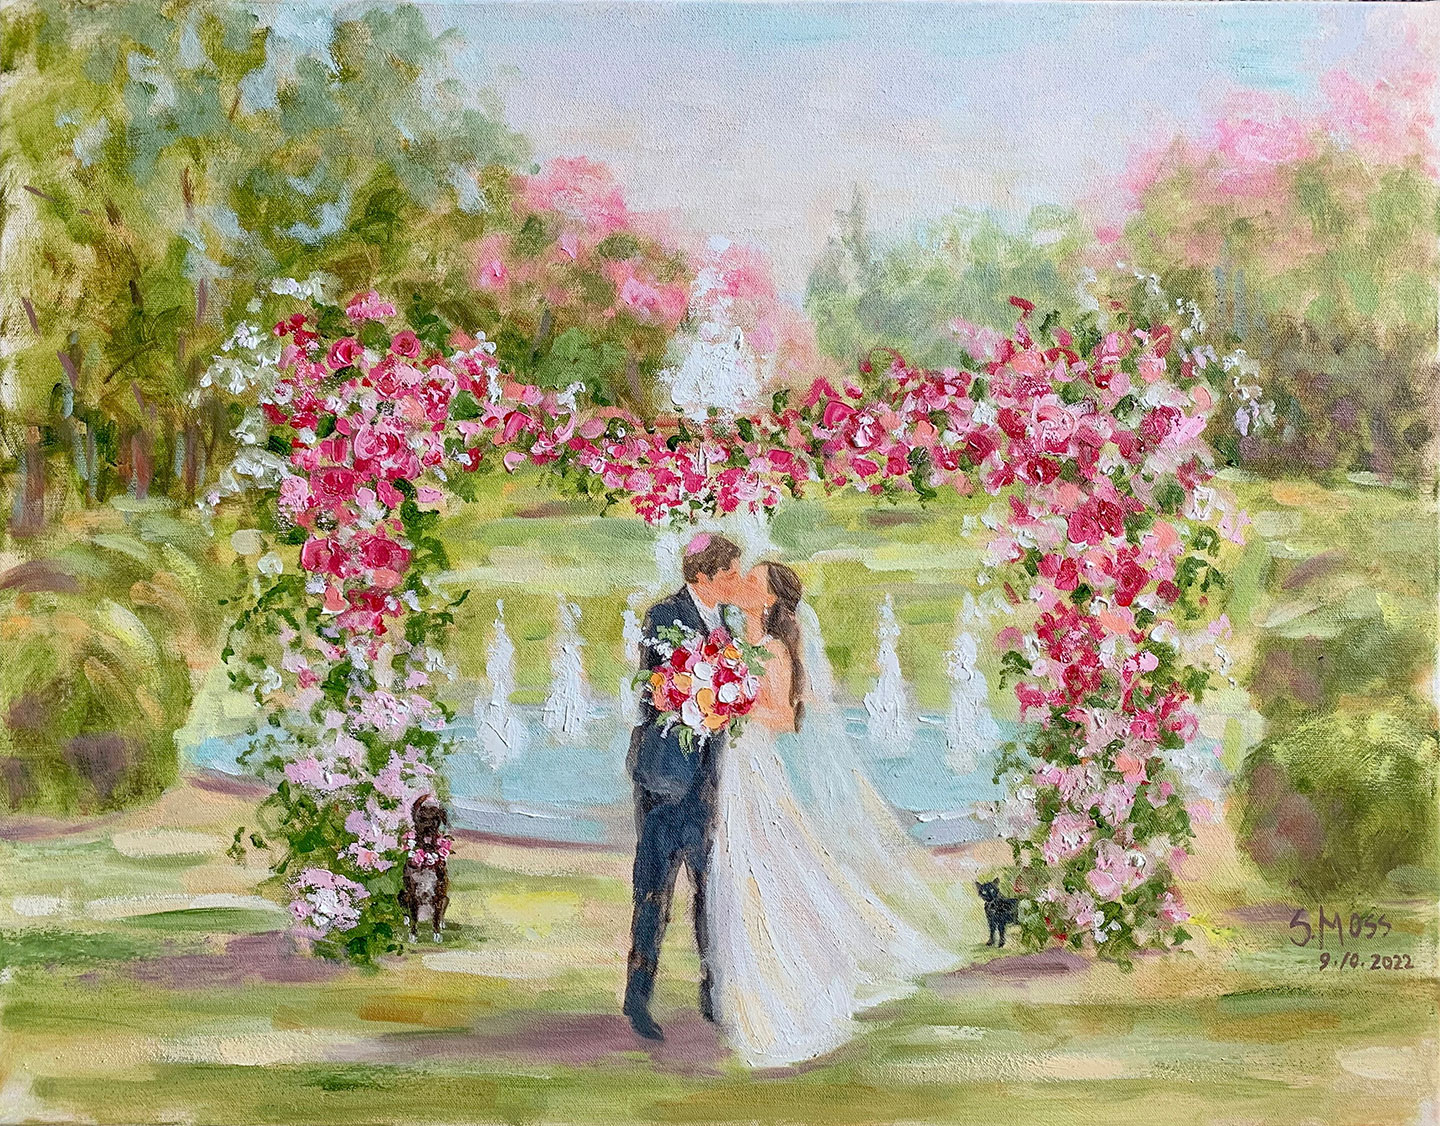 Painting of Jewish wedding ceremony at Texas Discovery Gardens, Dallas Texas by artist Susan Moss Cooper